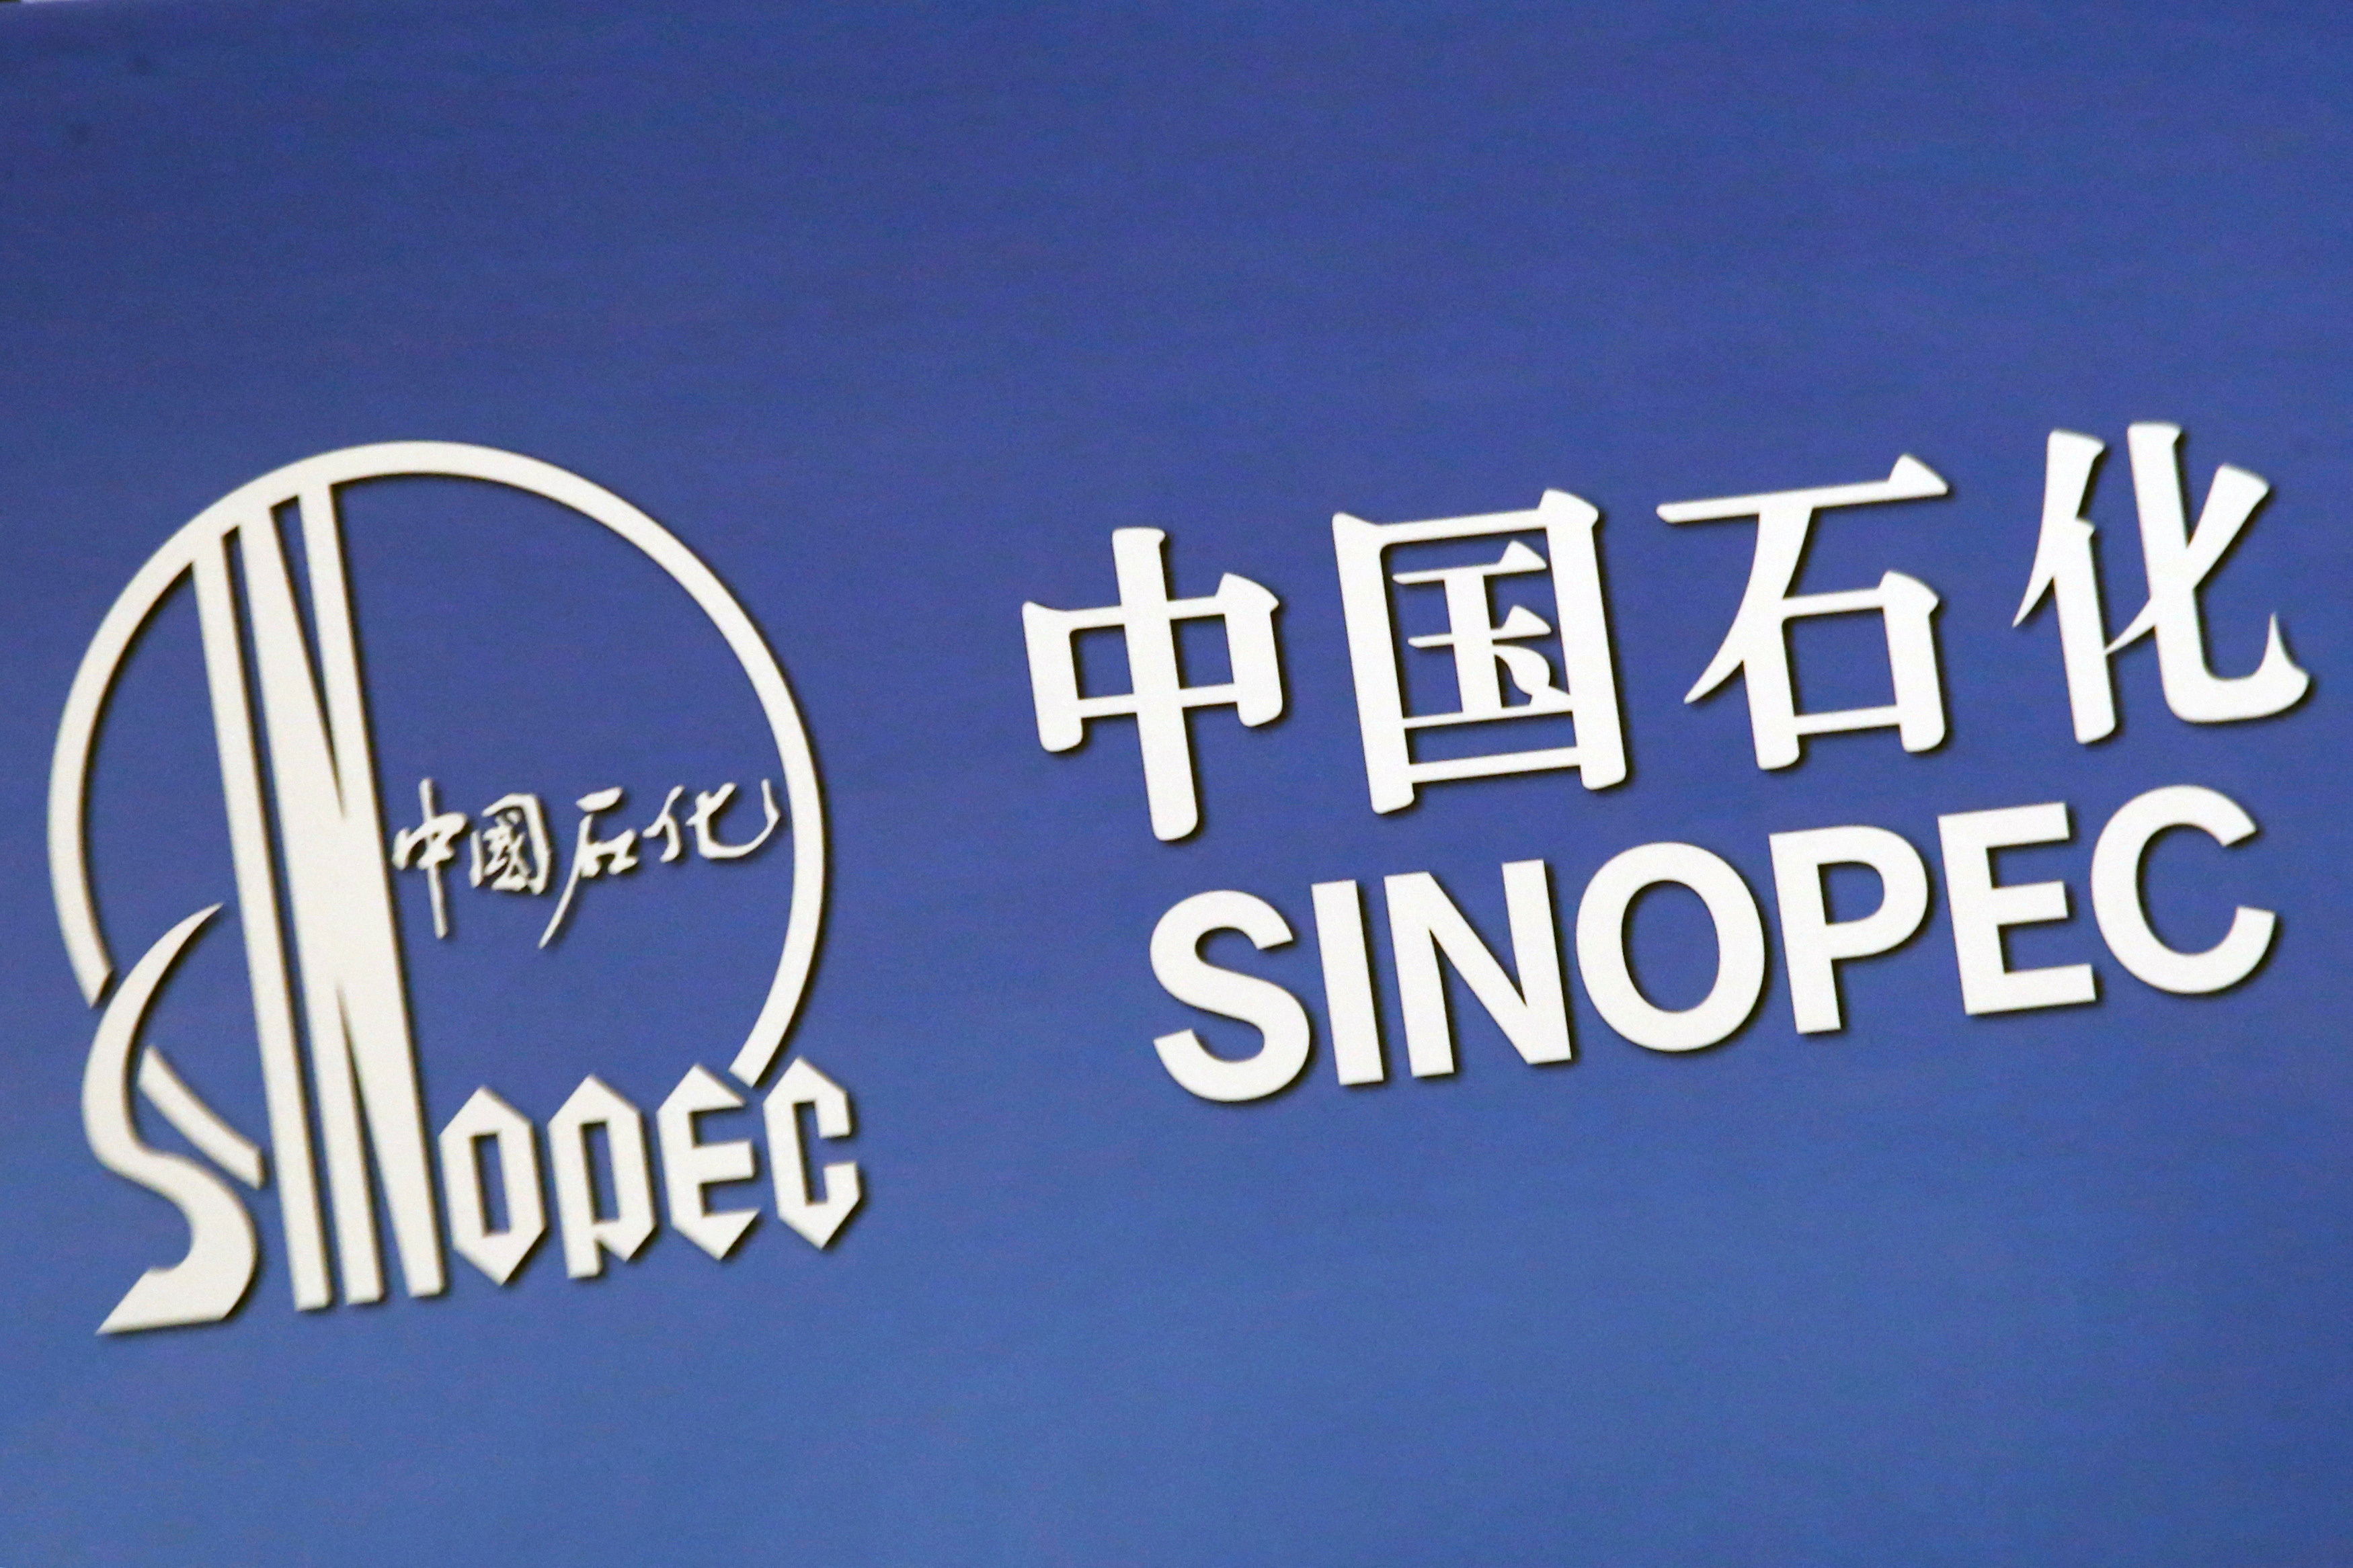 Sinopec sees China's fuel demand recovery gaining momentum